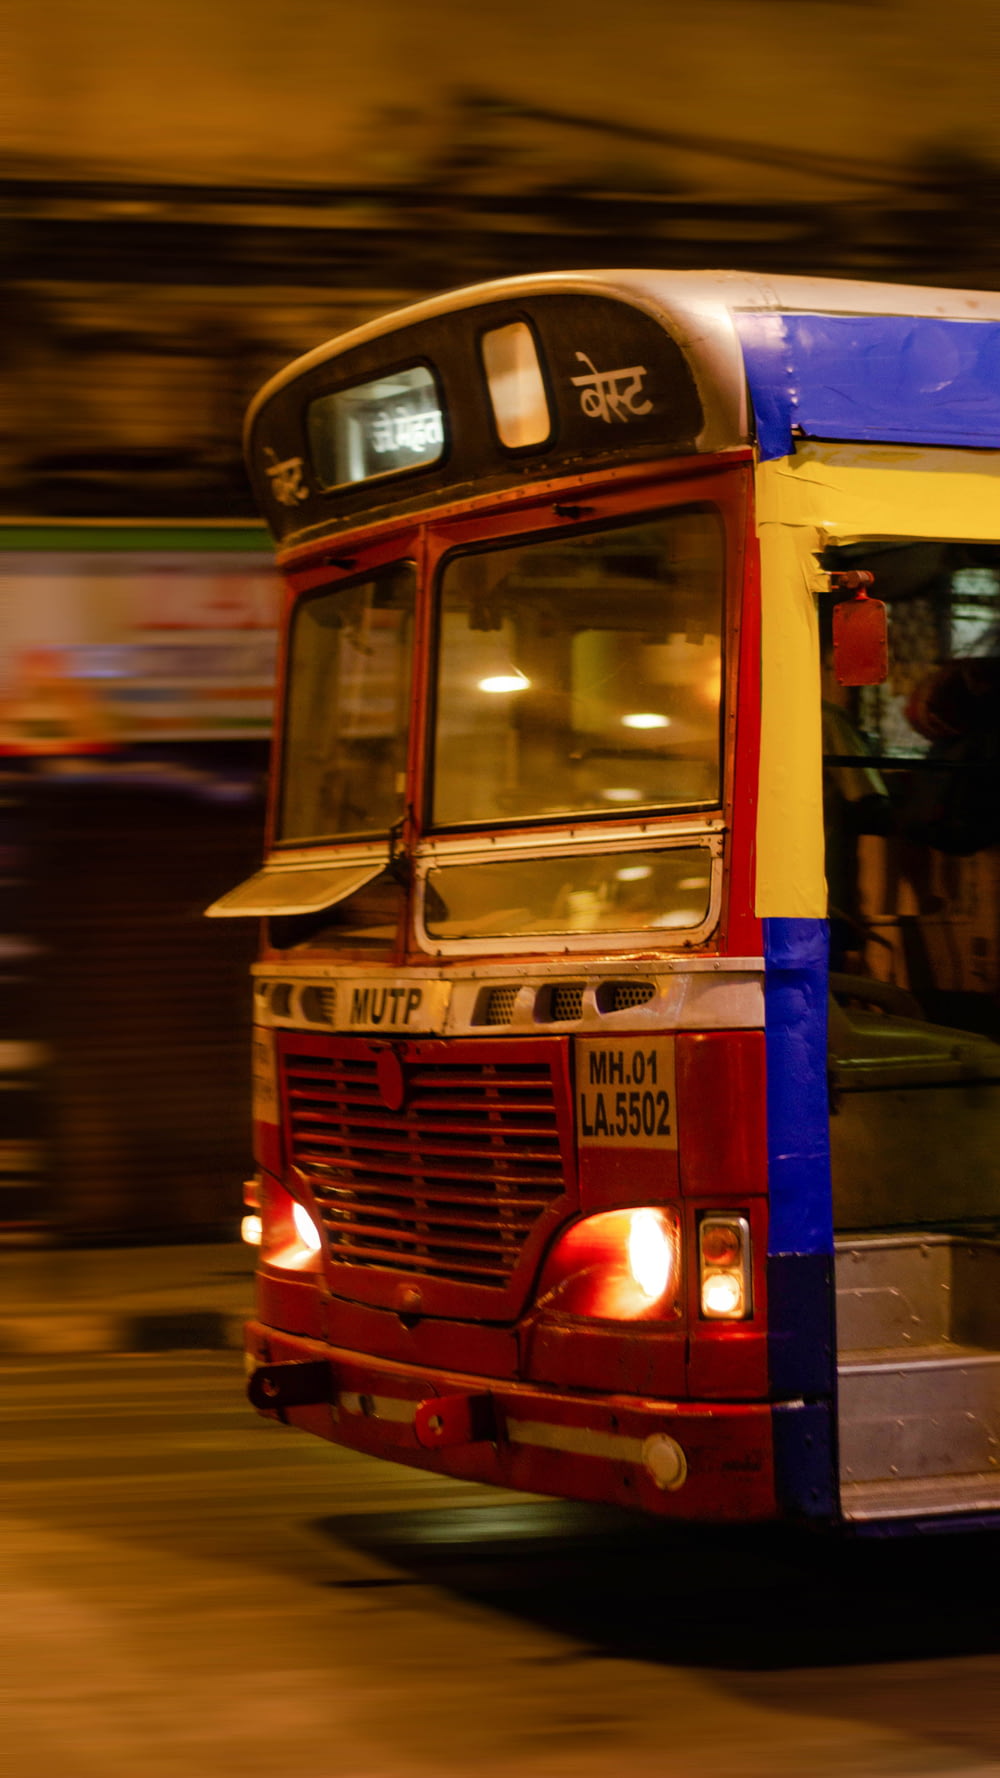 red and blue bus on the street during night time